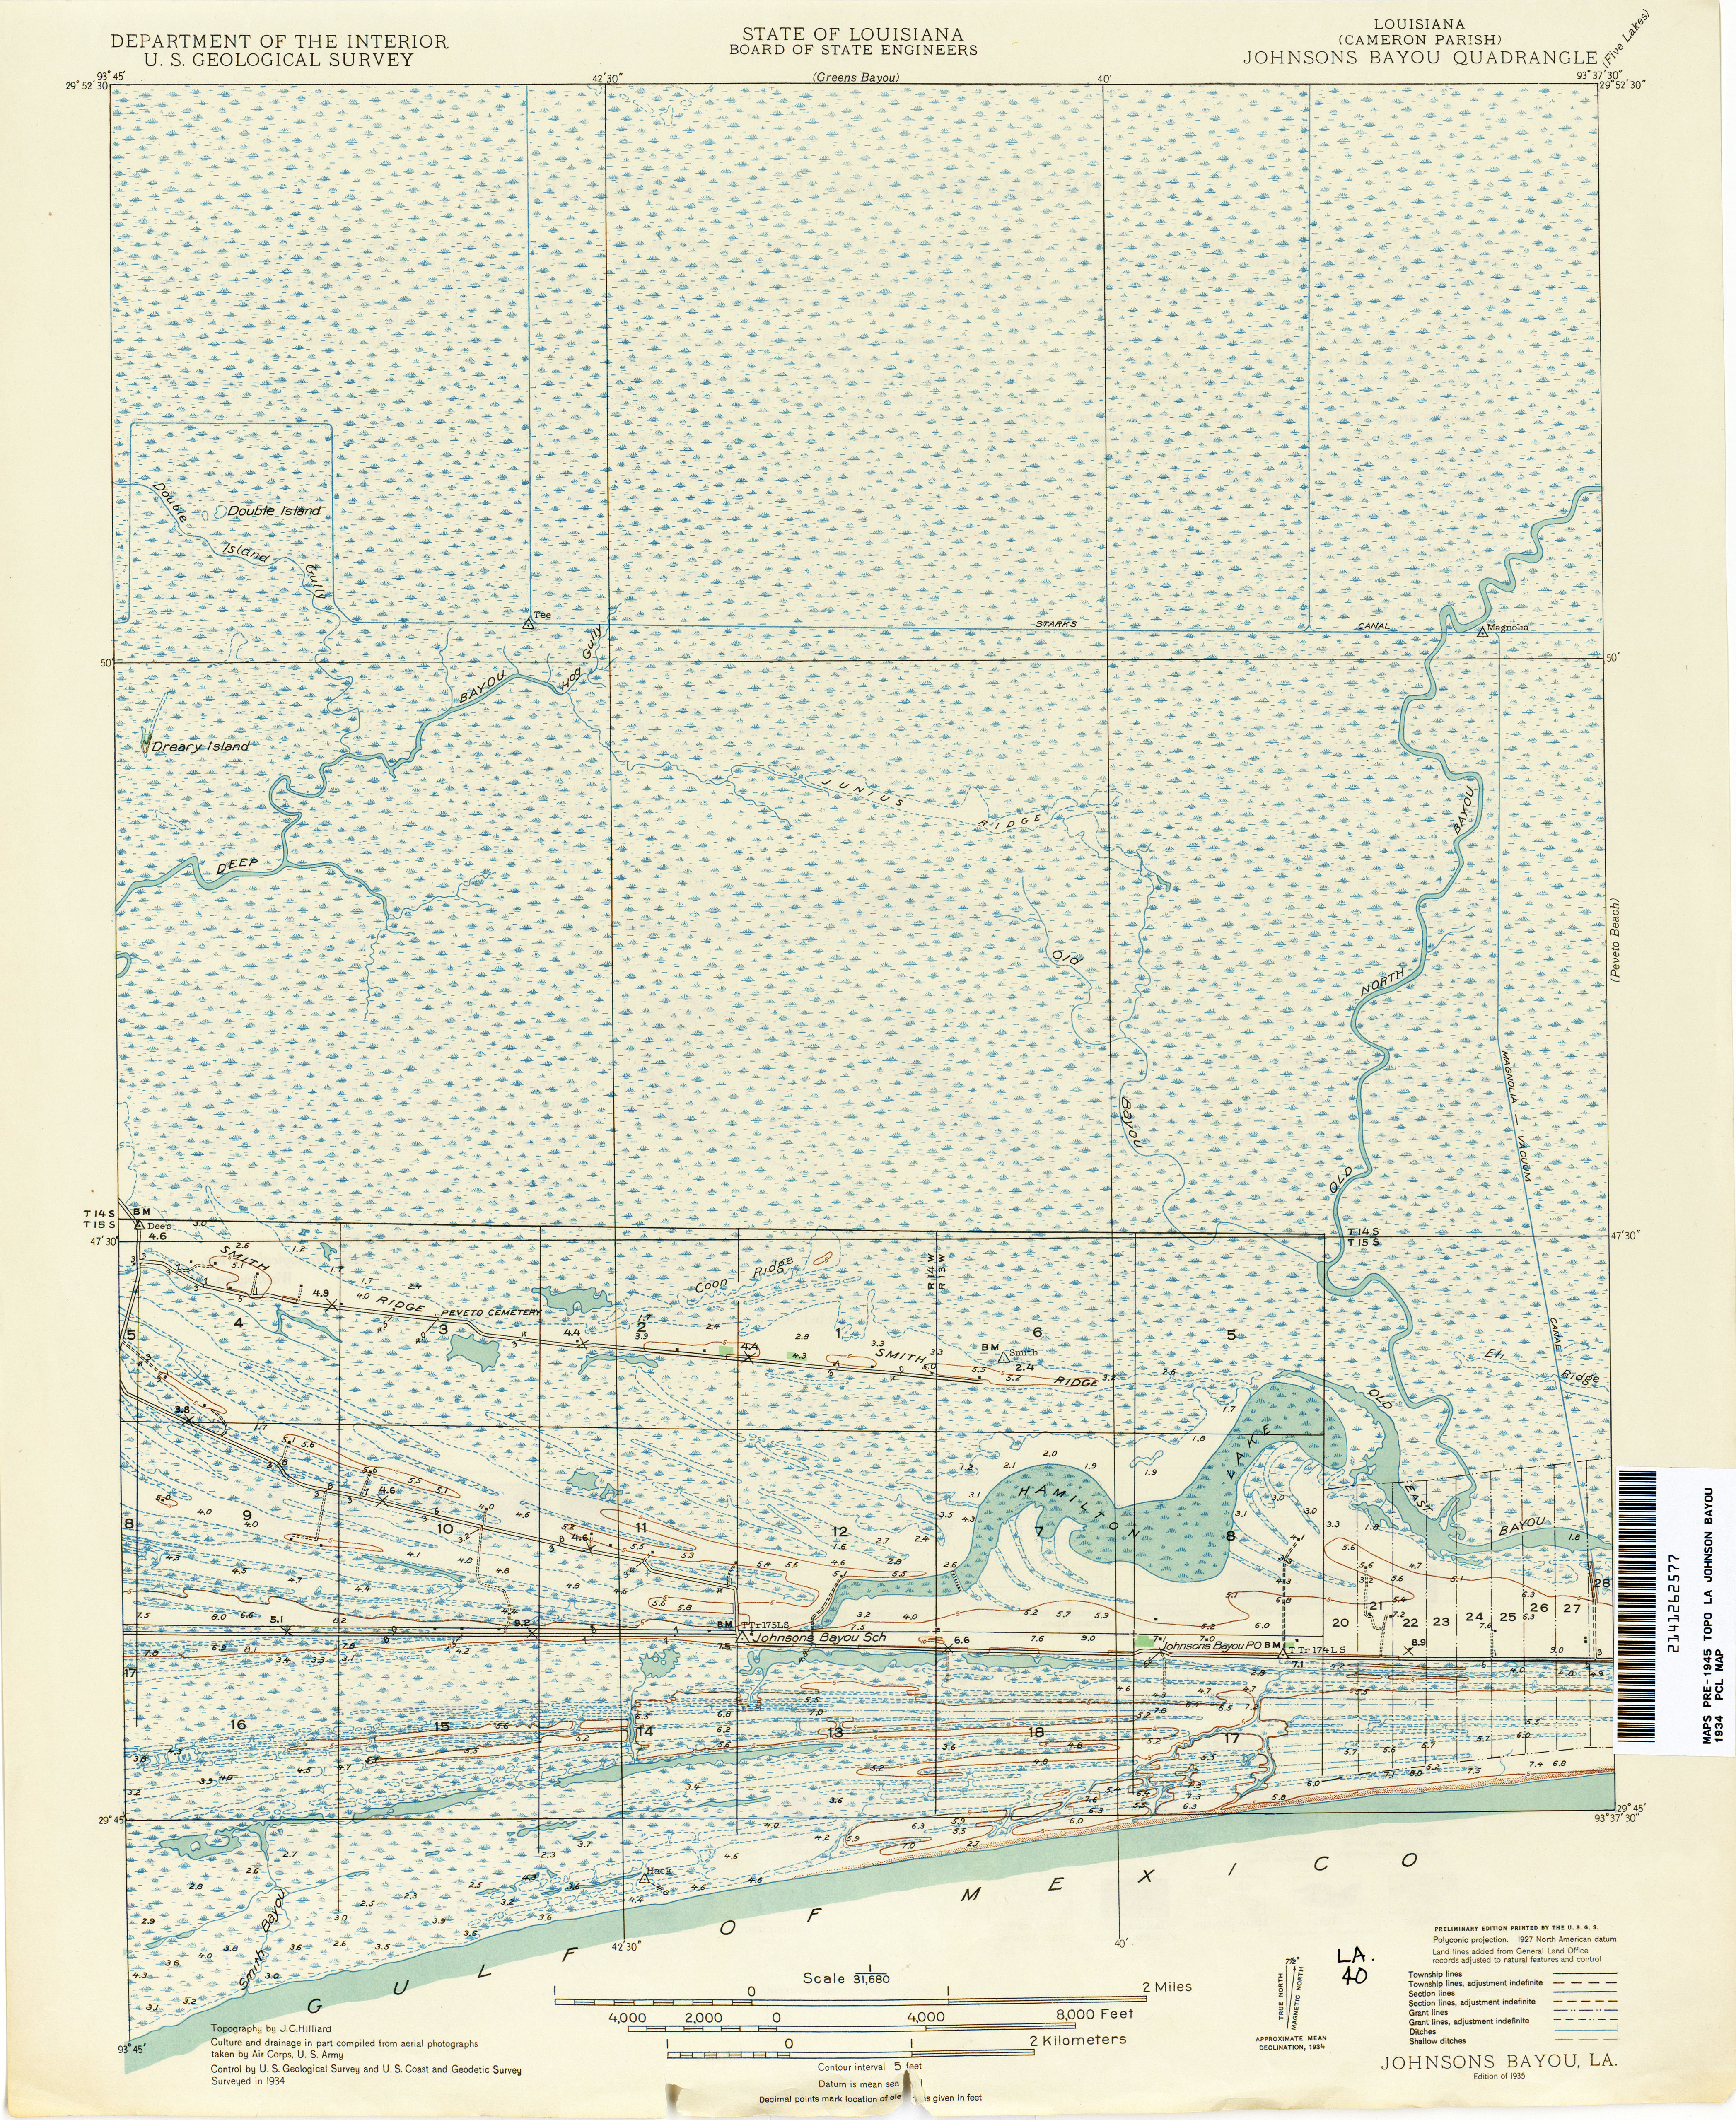 The Louisiana State University topographical map of Louisiana : showing the  characteristic features of the surface of the state in symbols and colors -  Maps Project - Birmingham Public Library Digital Collections